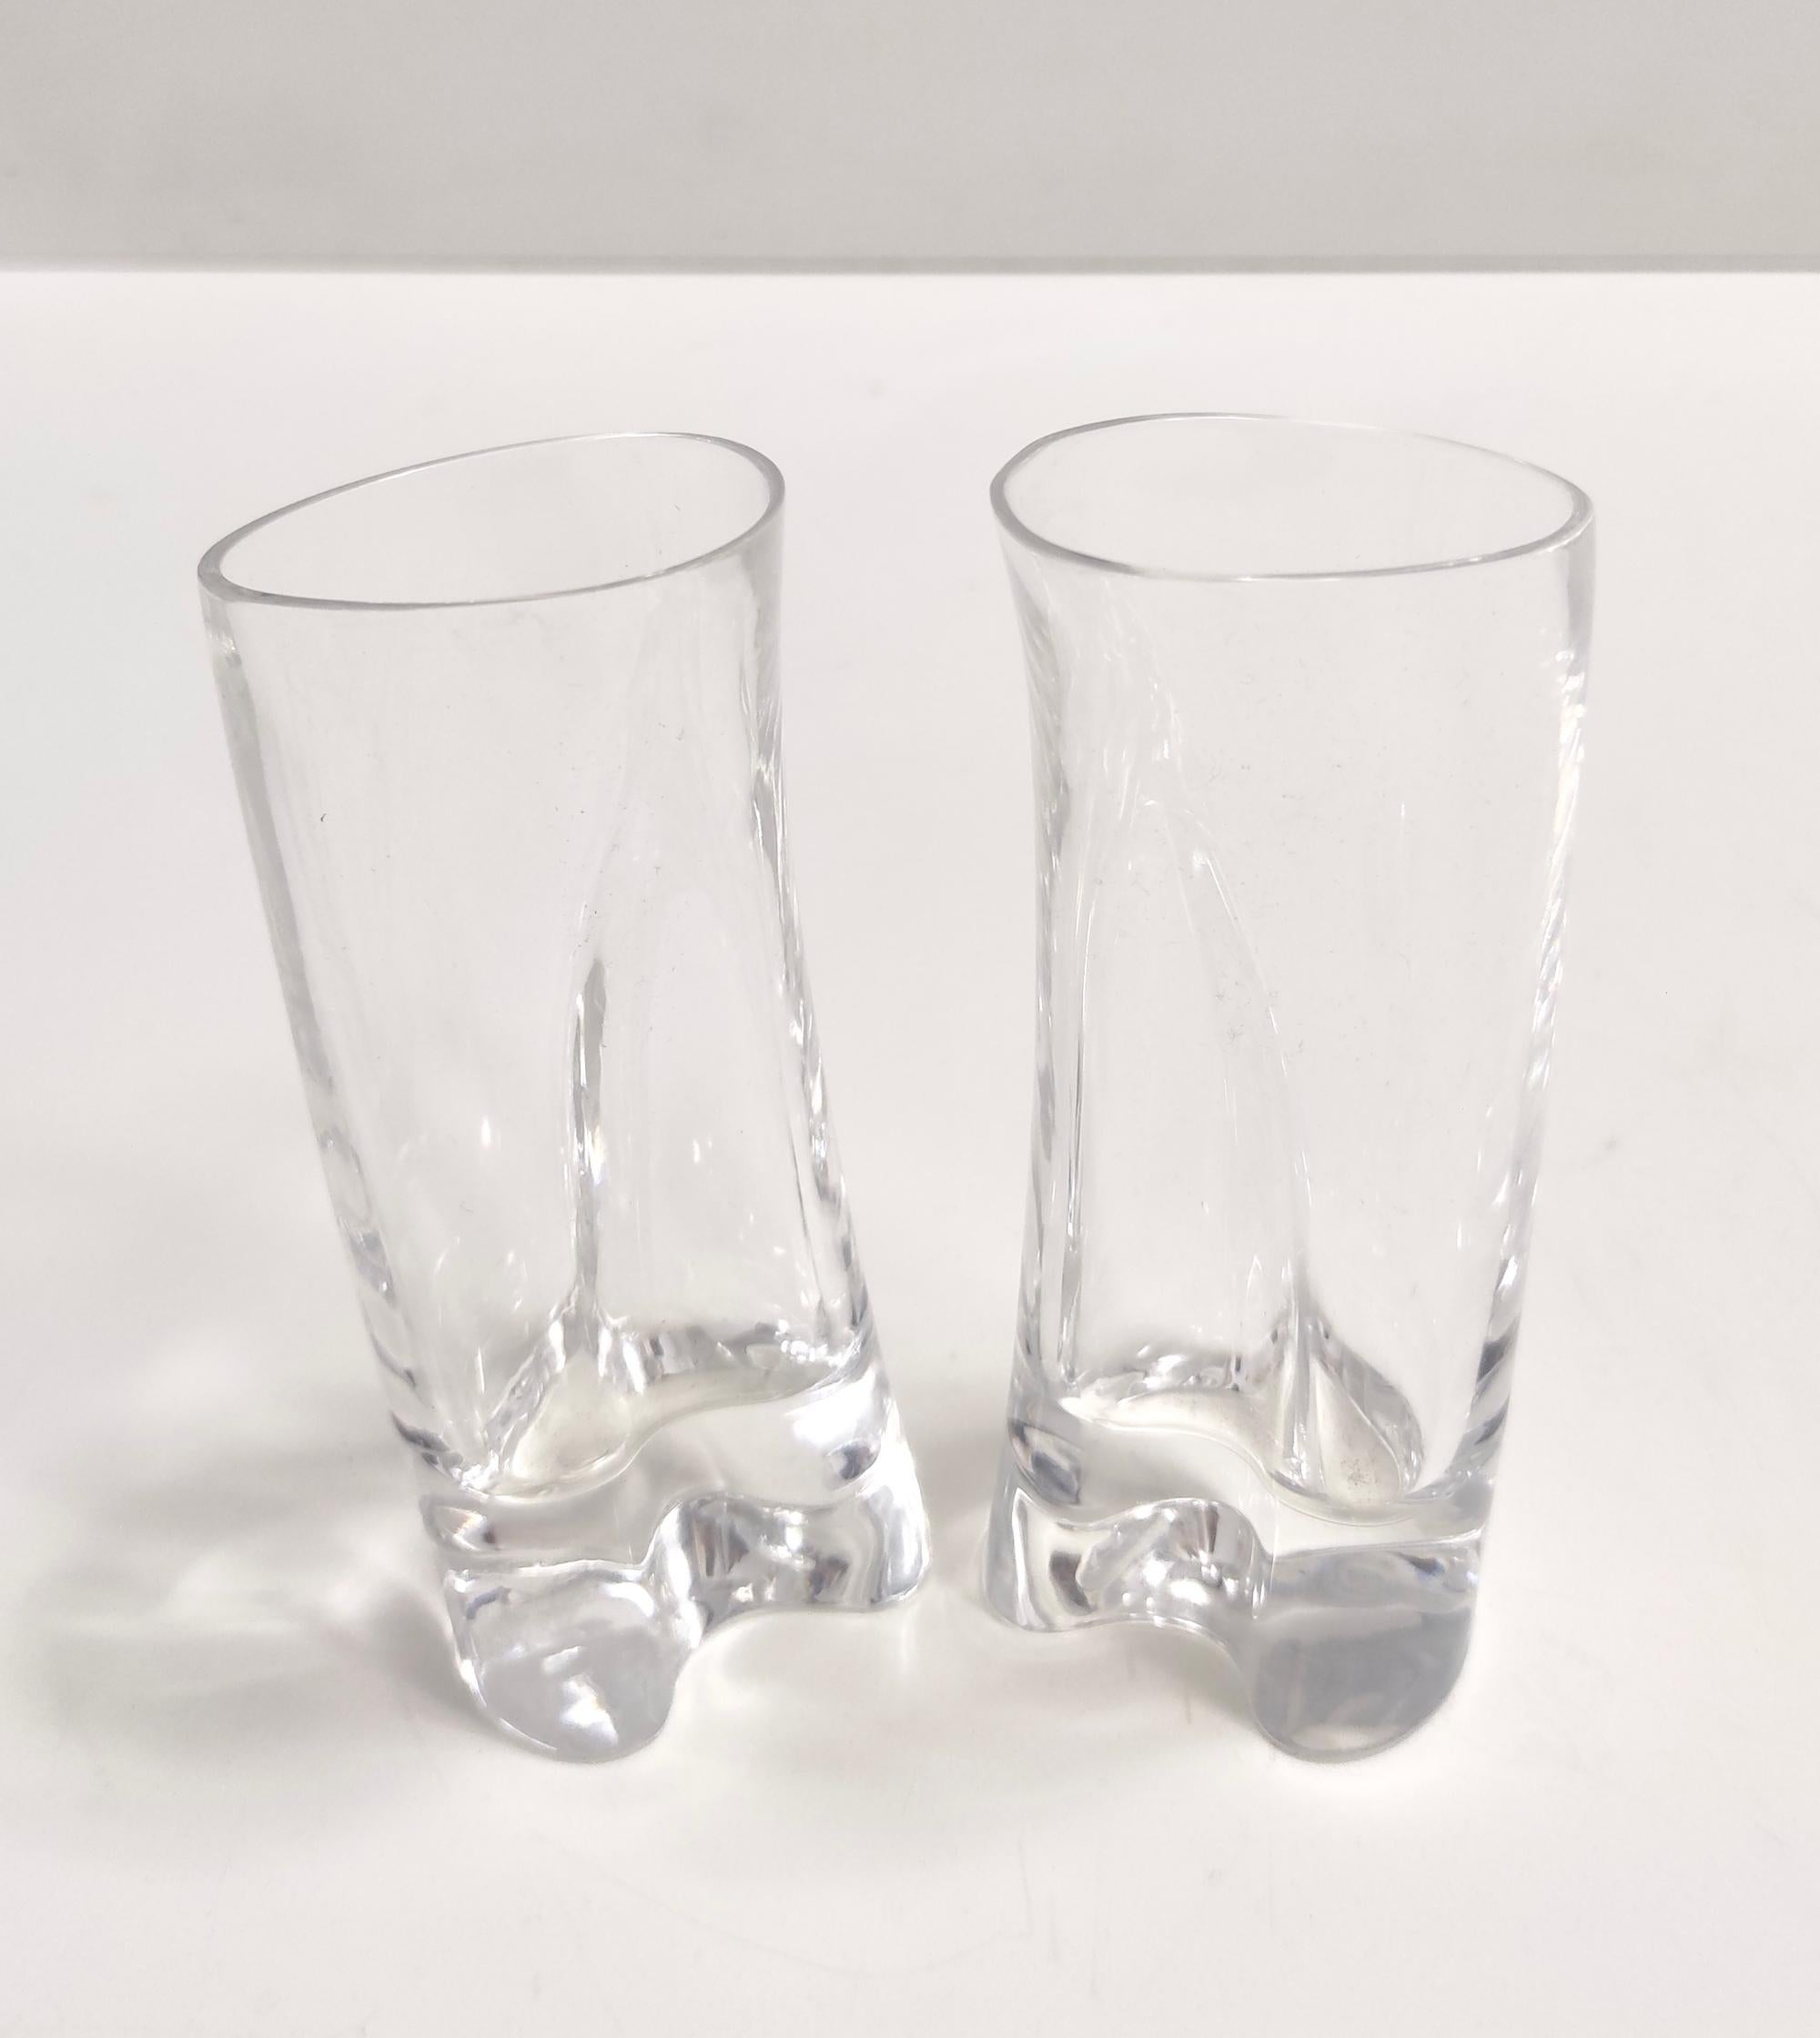 Set of Twelve Crystal Drinking Glasses by A.Mangiarotti for Cristallerie Colle For Sale 1